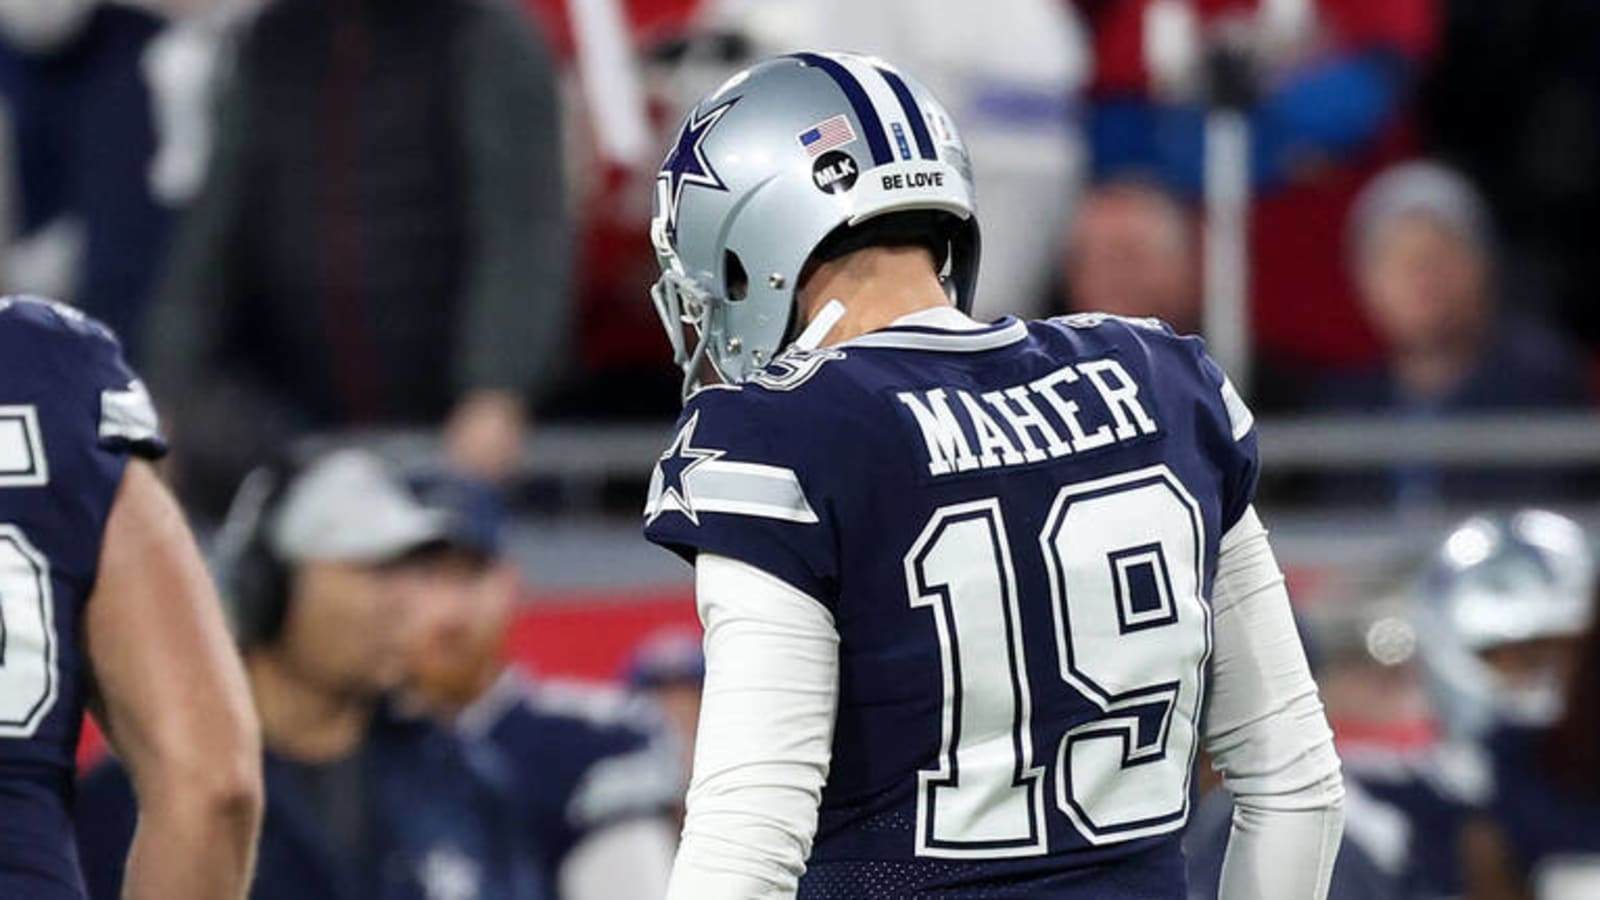 Twitter reacts to Cowboys' Maher missing four extra points